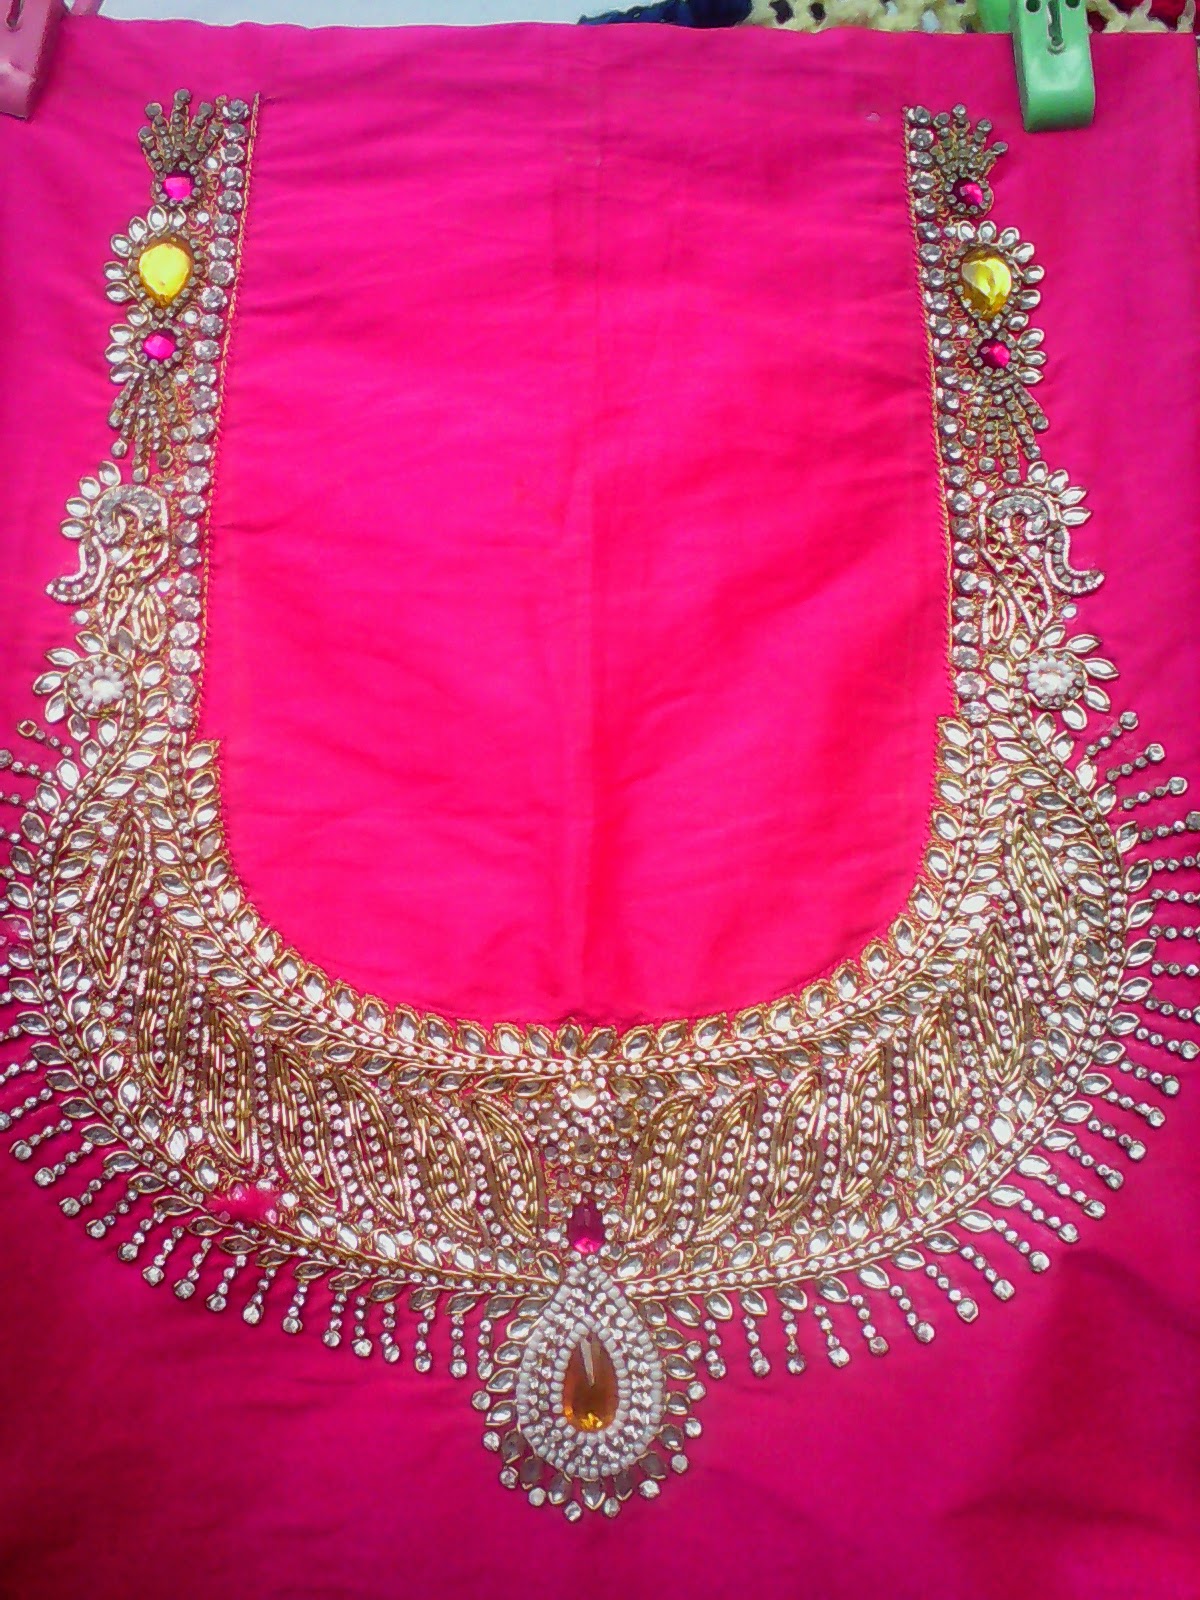 South Indian Bridal Blouse Designs: Maggam work blouse designs